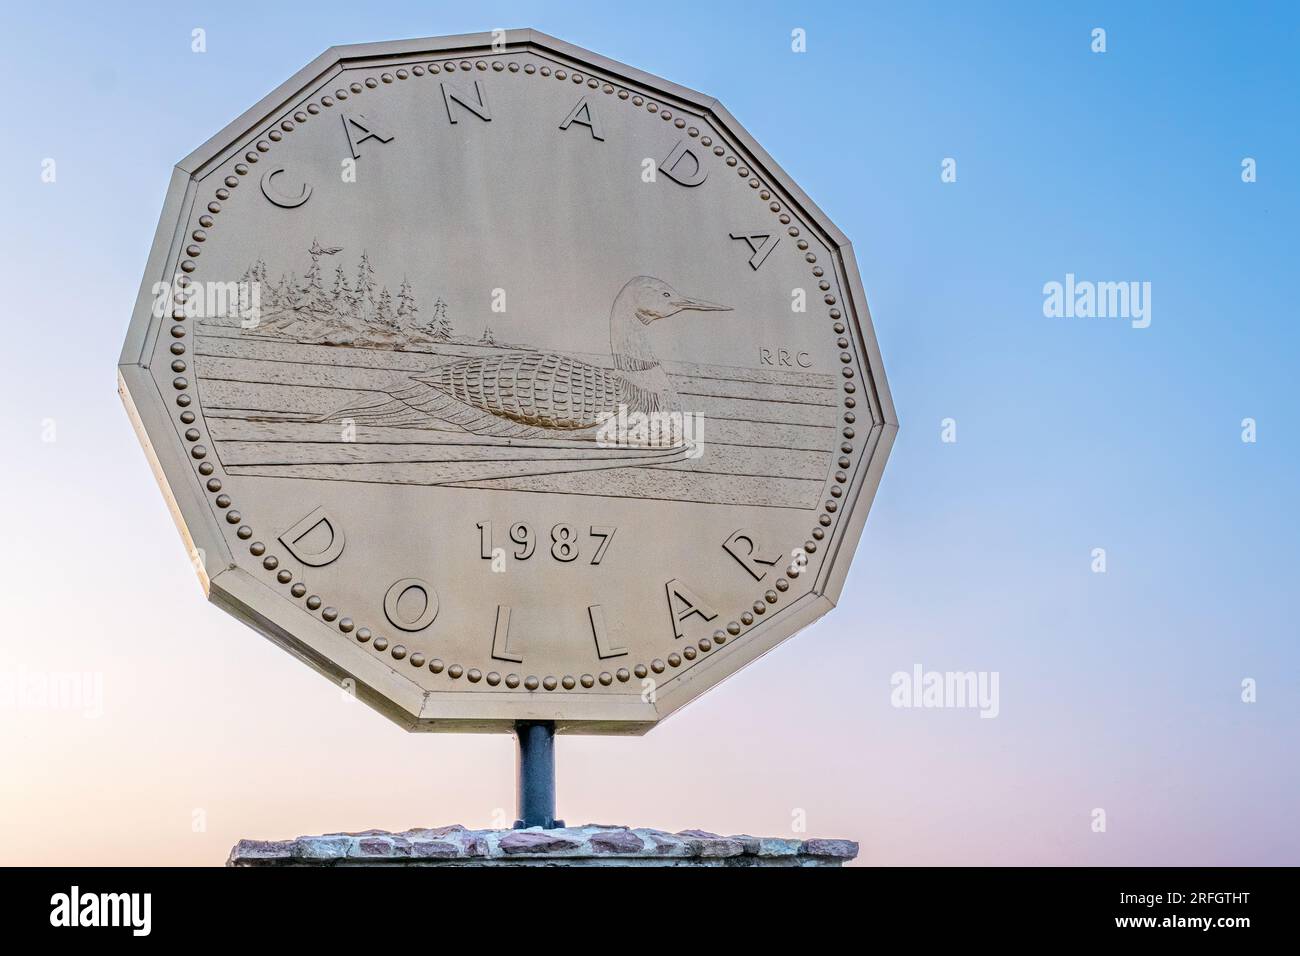 The World's Largest Loonie is a roadside attraction located in Echo Bay Ontario Canada. Stock Photo